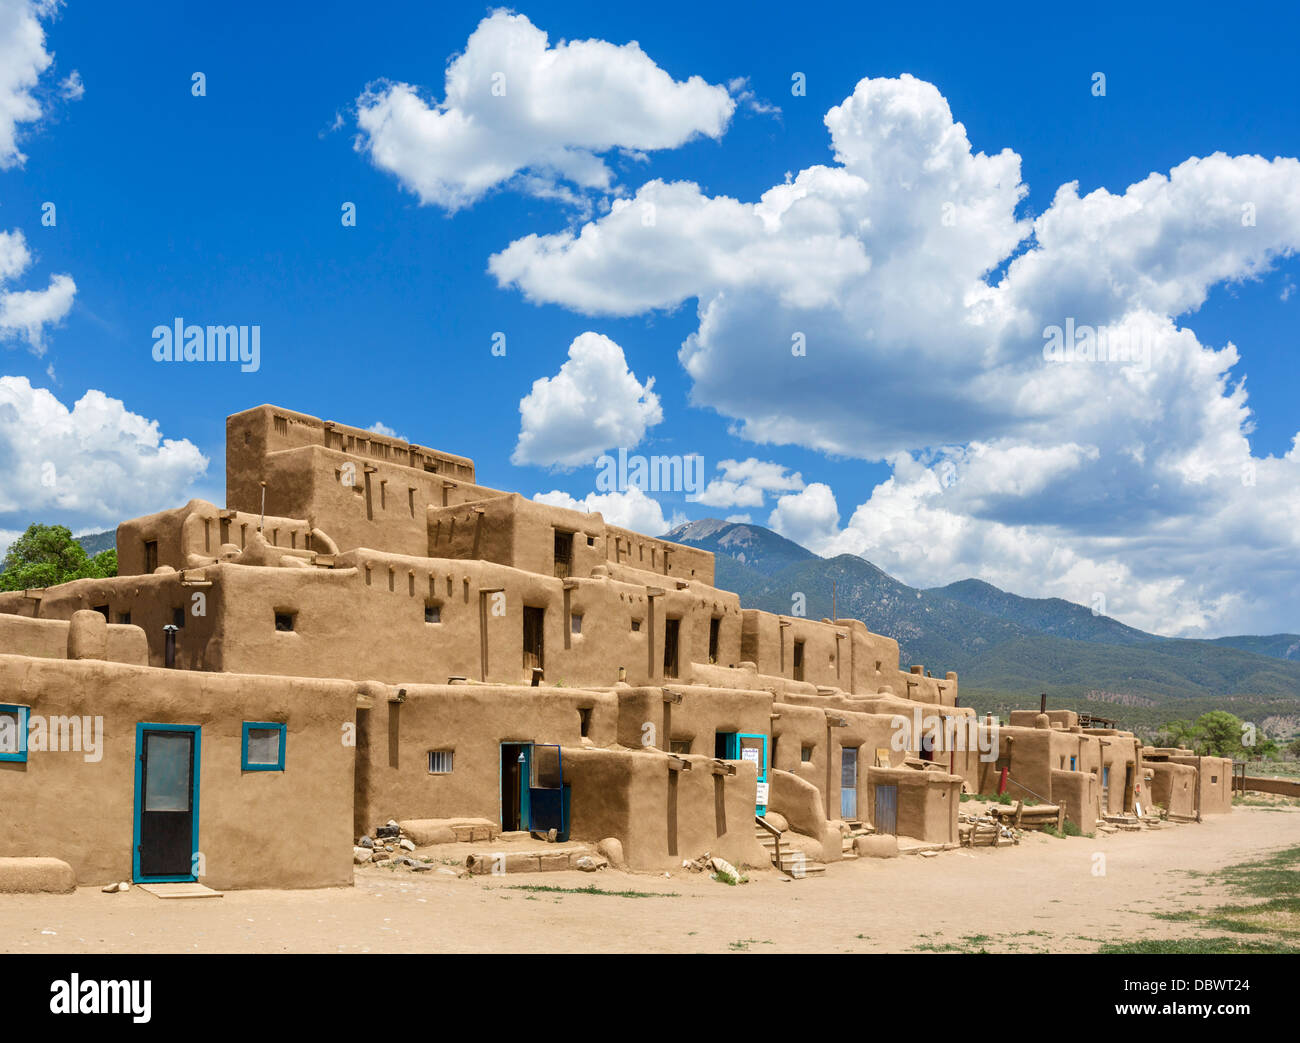 The Hlaauma (North House) native american dwellings in historic Taos Pueblo, Taos, New Mexico, USA Stock Photo